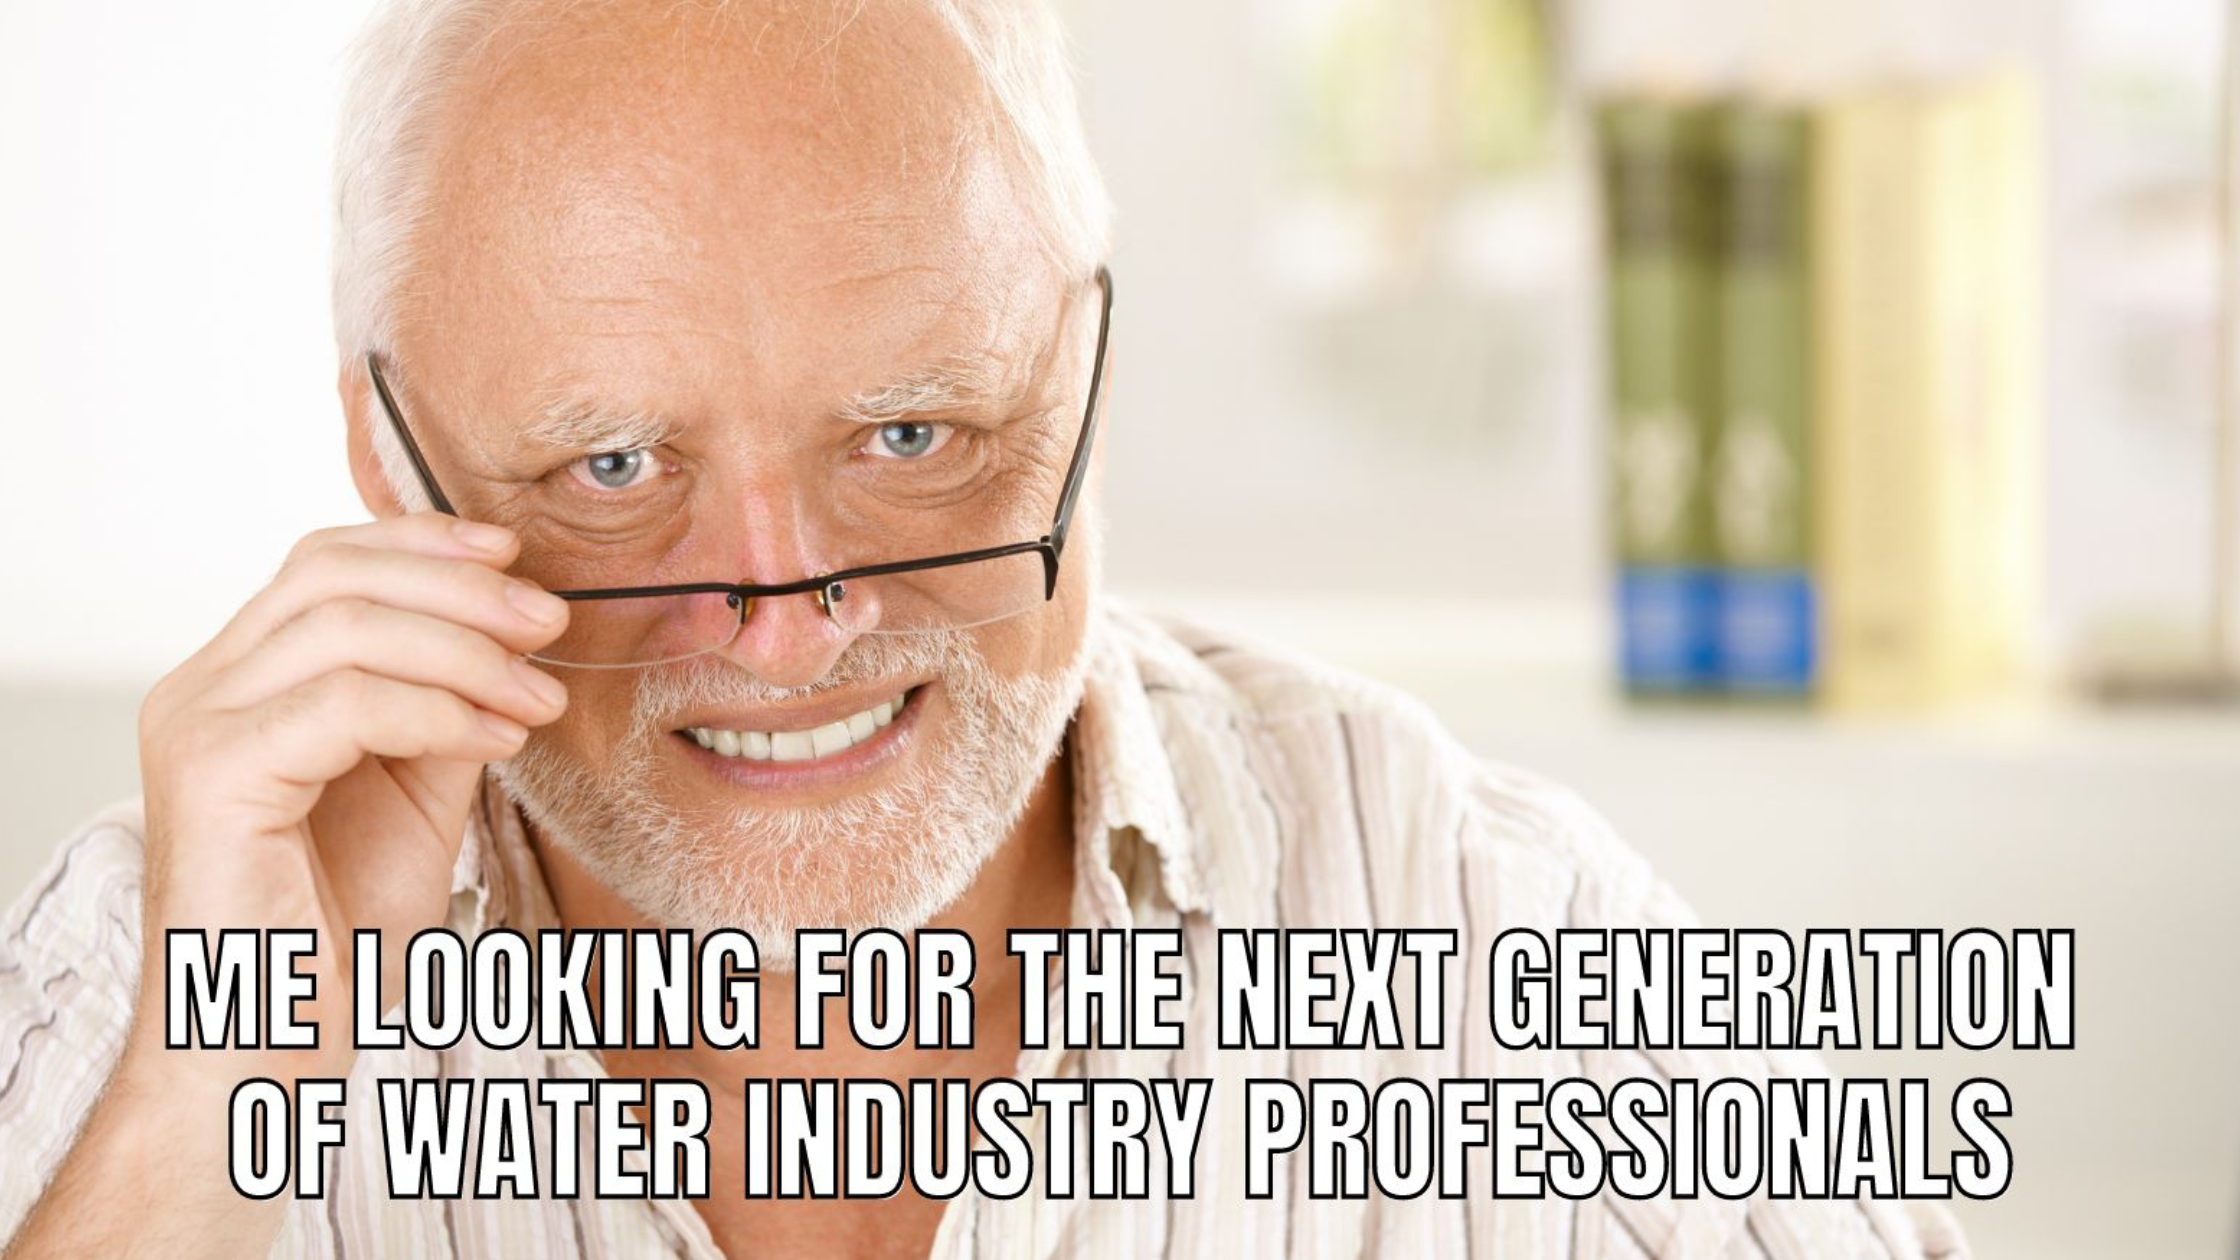 Where will the next generation of water professionals come from?